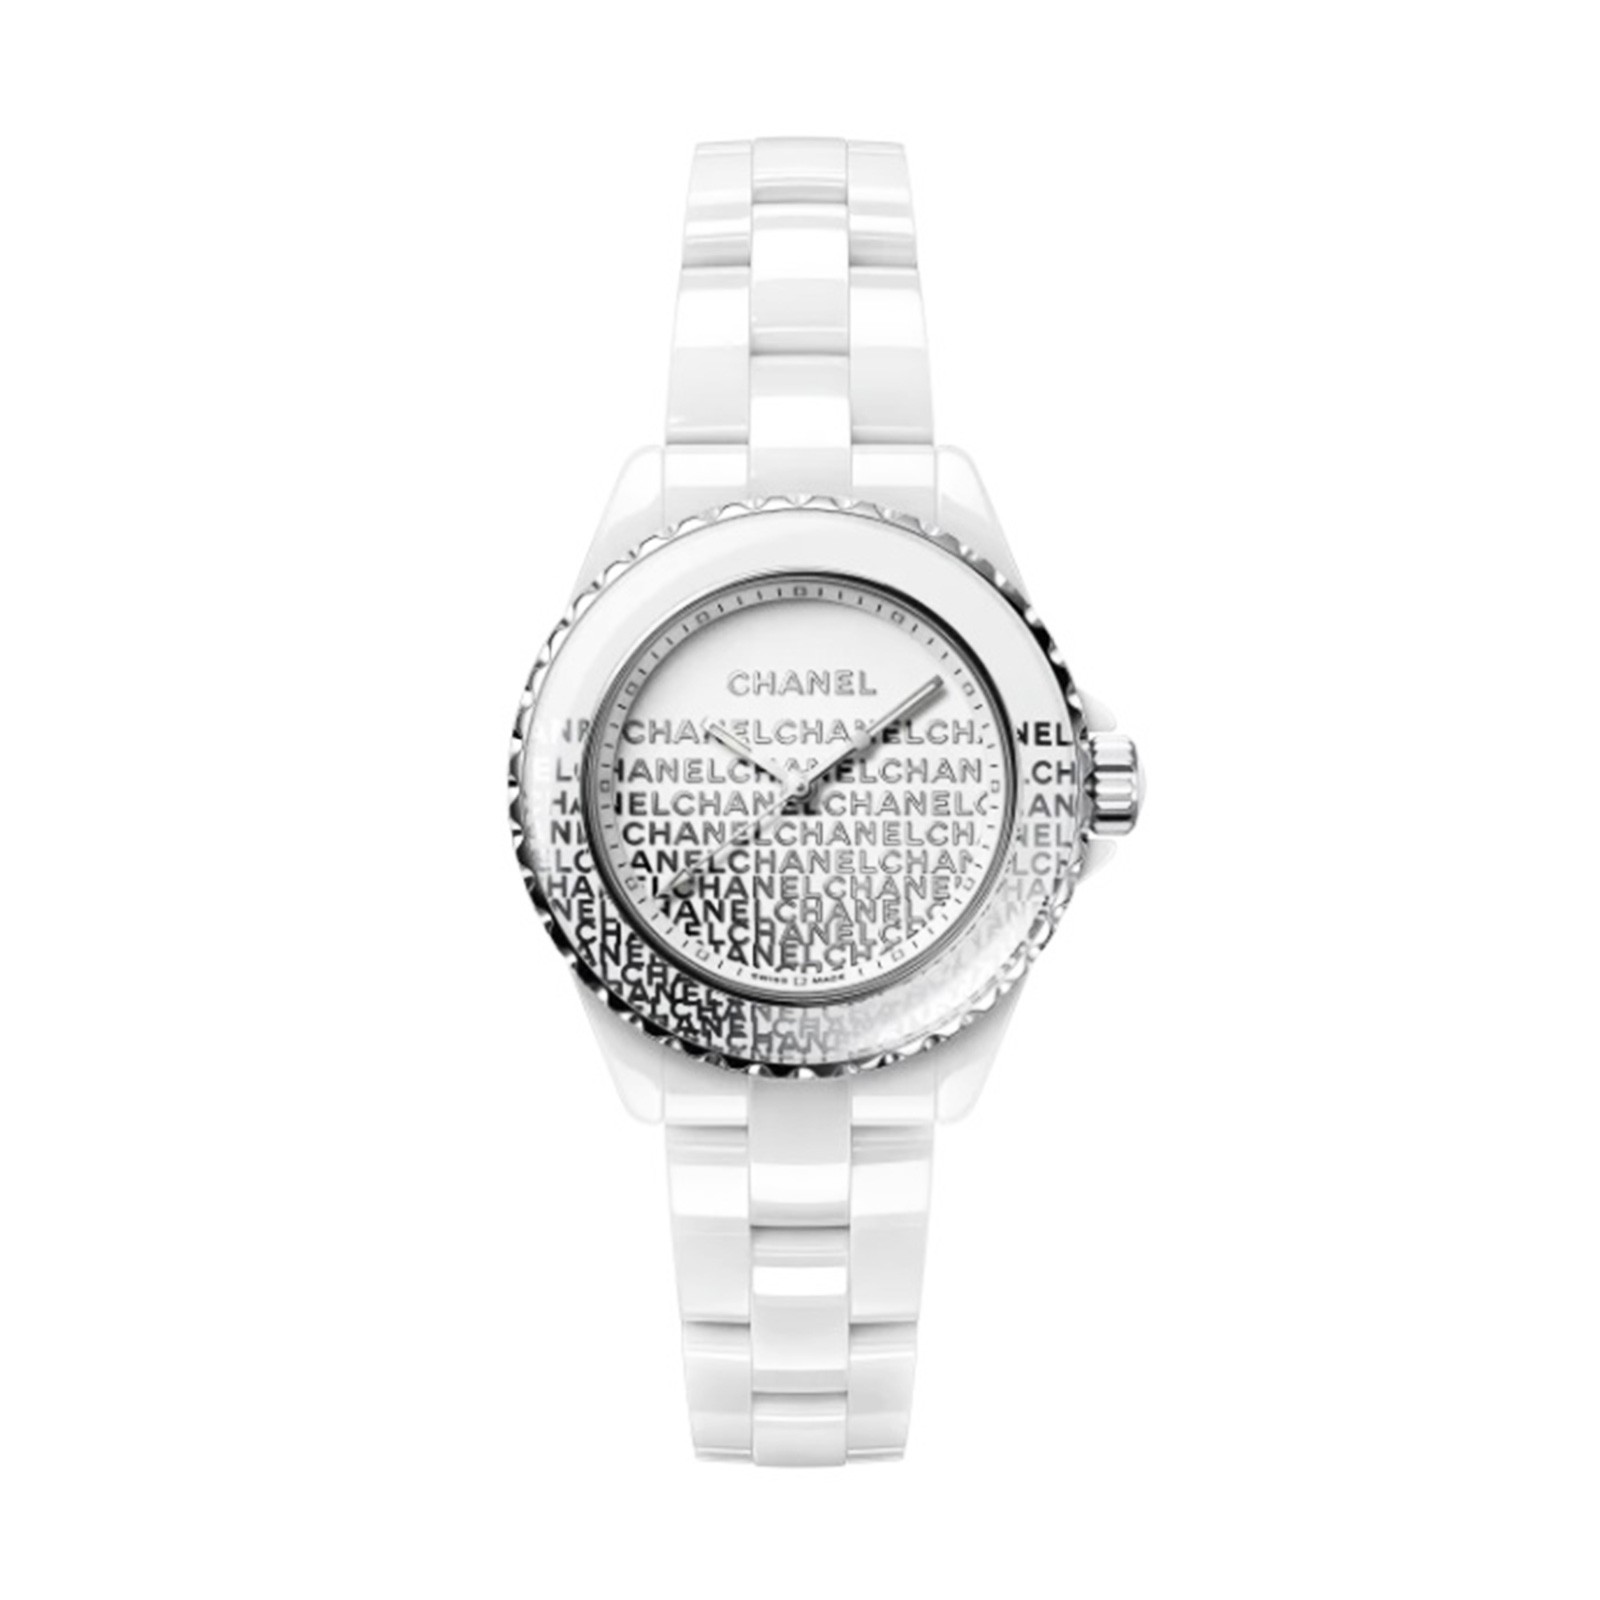 Chanel unveils new creations at Watches  Wonders 2023